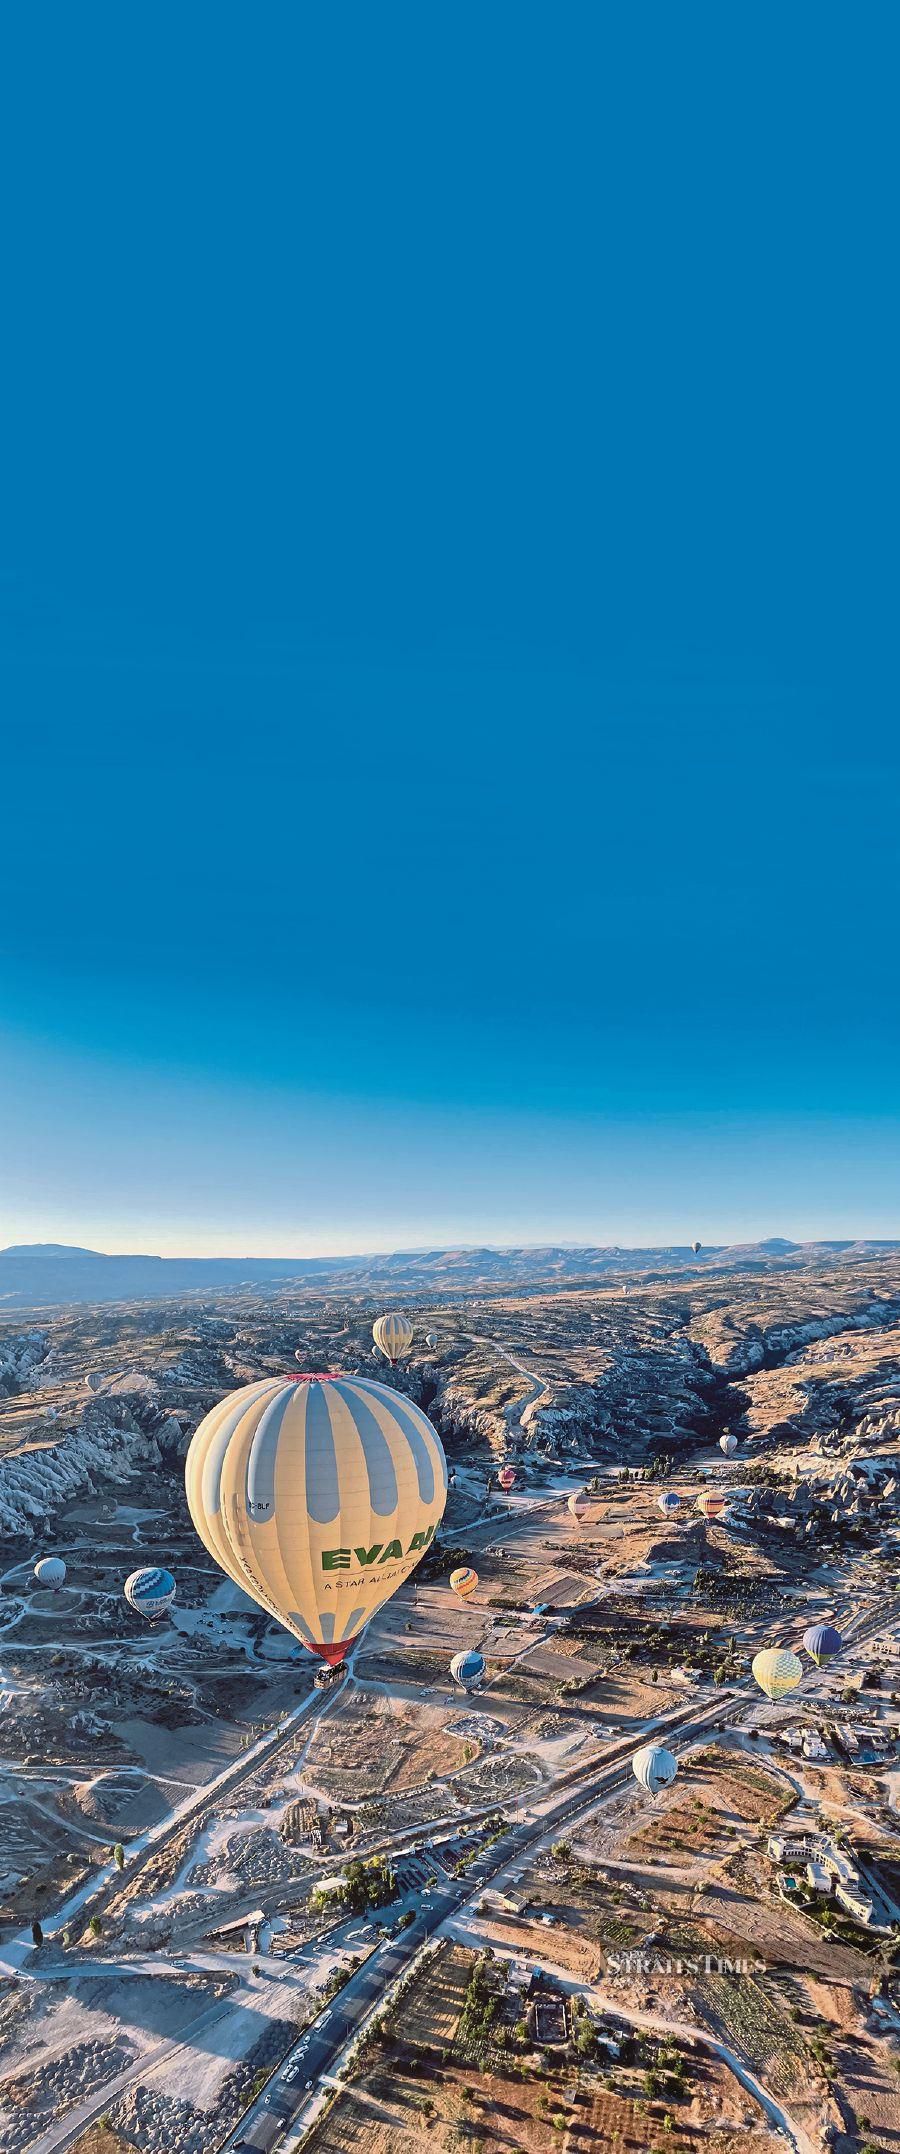 Hot air ballooning is one of the must-do activities in Cappadocia. Pictures by Hanna Hussein